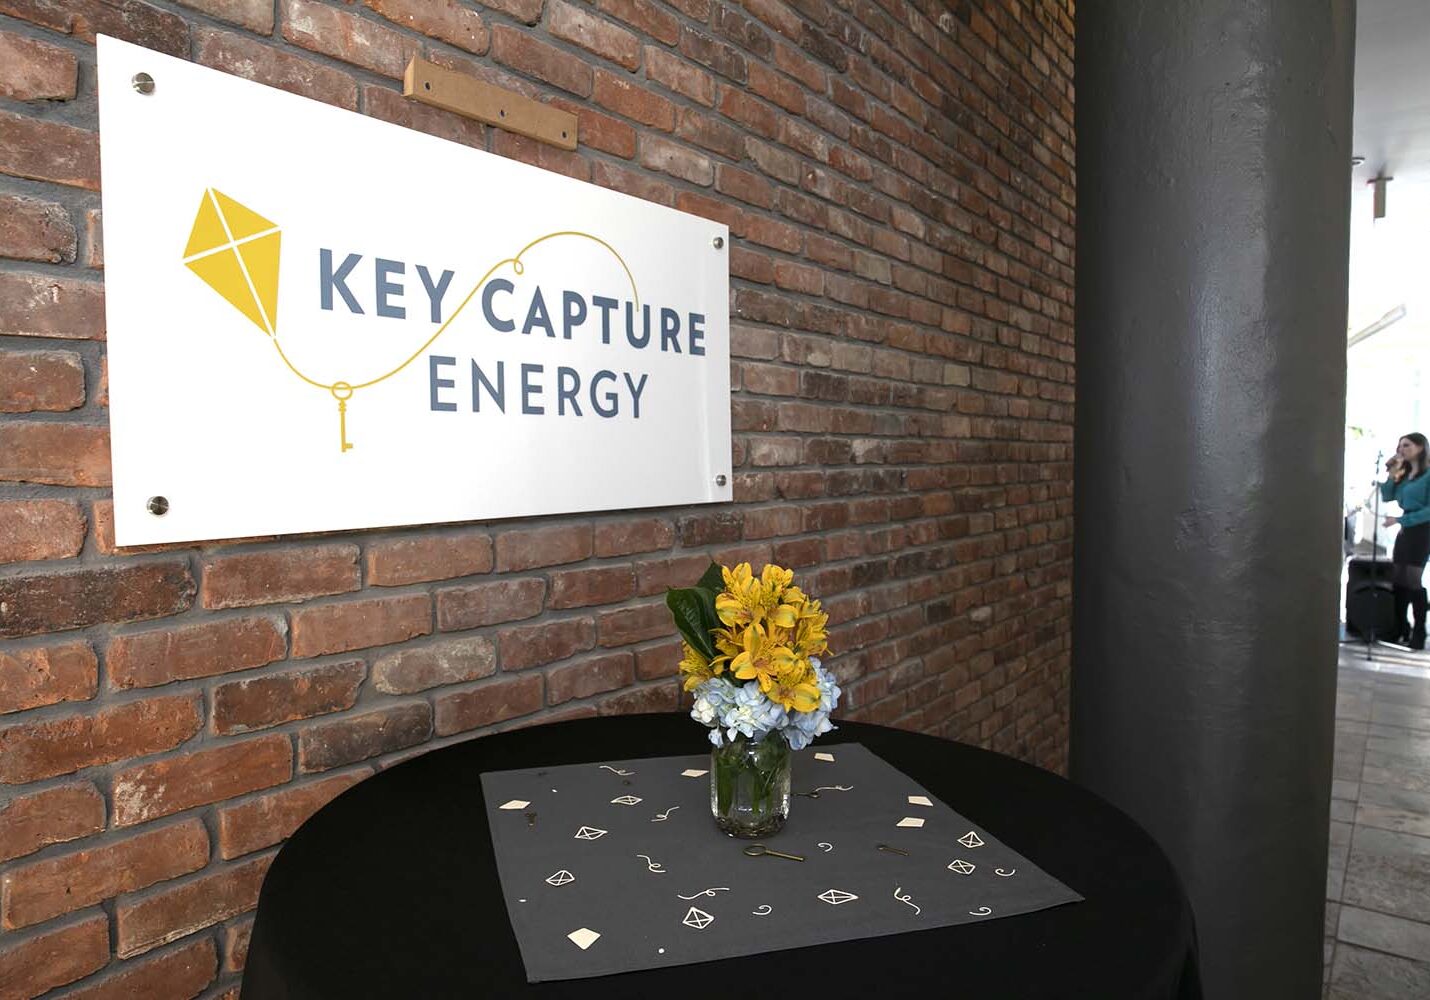 Sign with the Key Capture Energy logo on it on a brick wall.